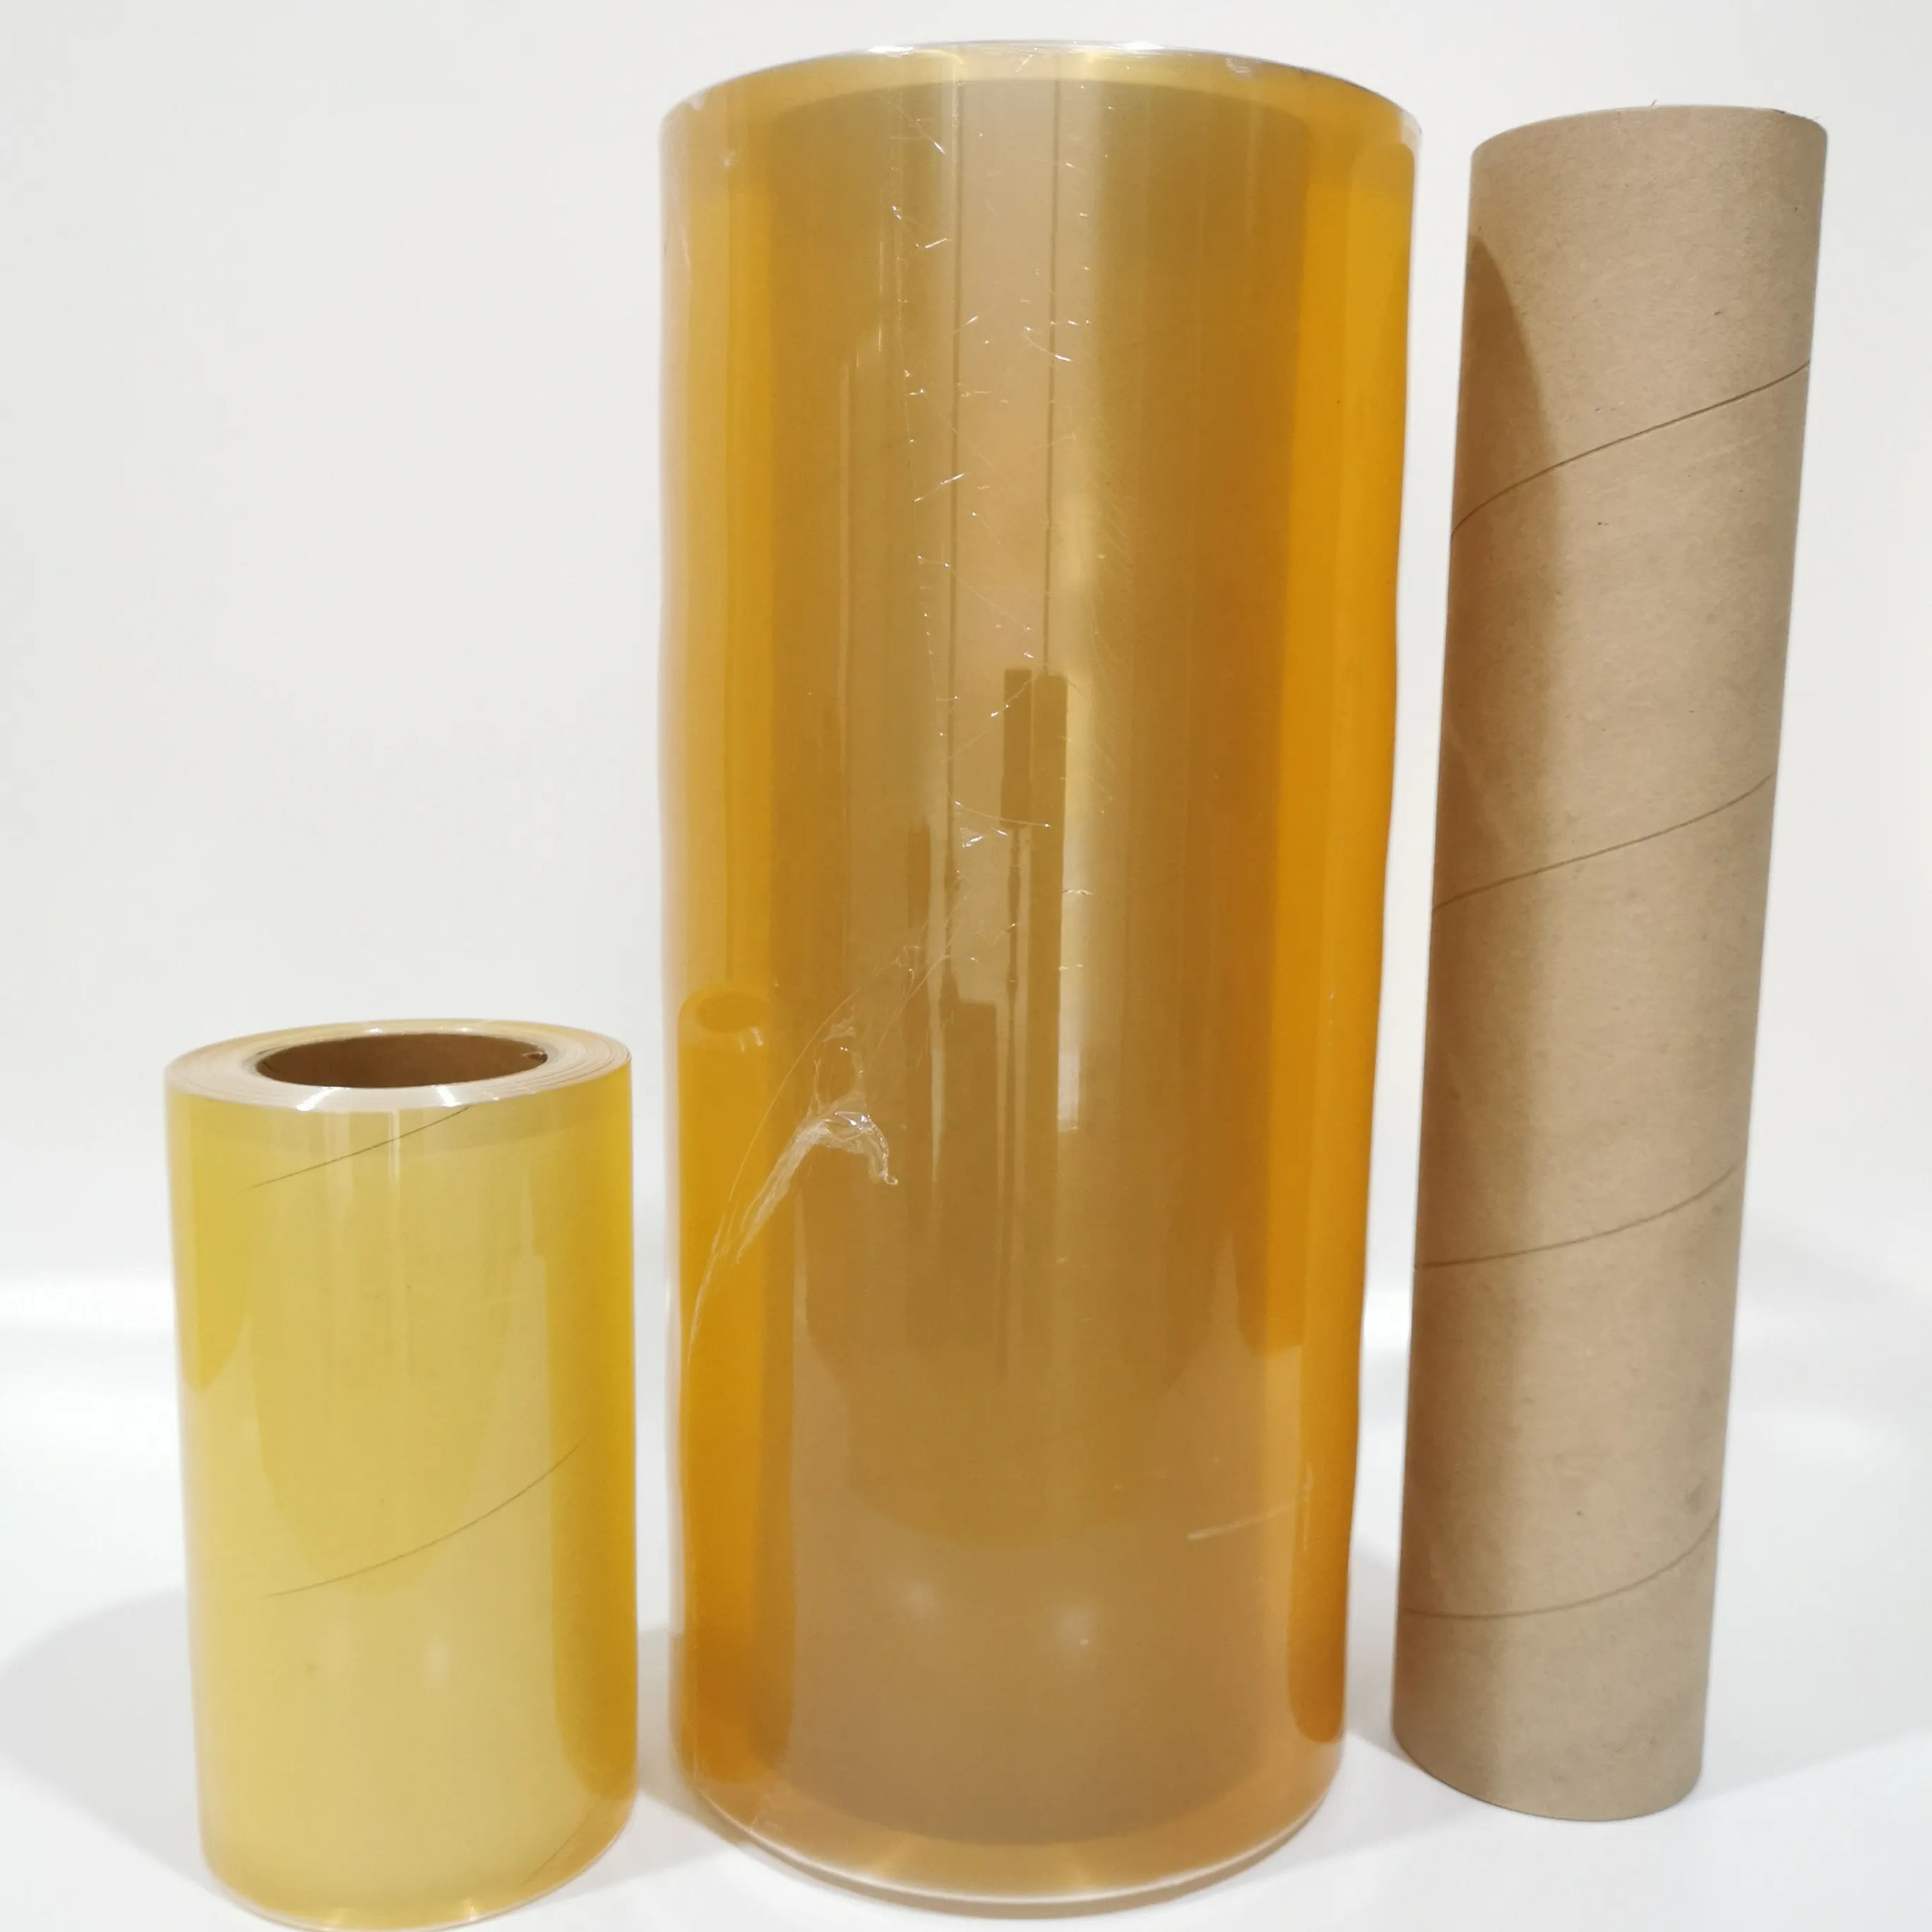 Food Grade Clear Factory Packing PVC Plastic Film Jumbo Roll For Keeping Food Fresh